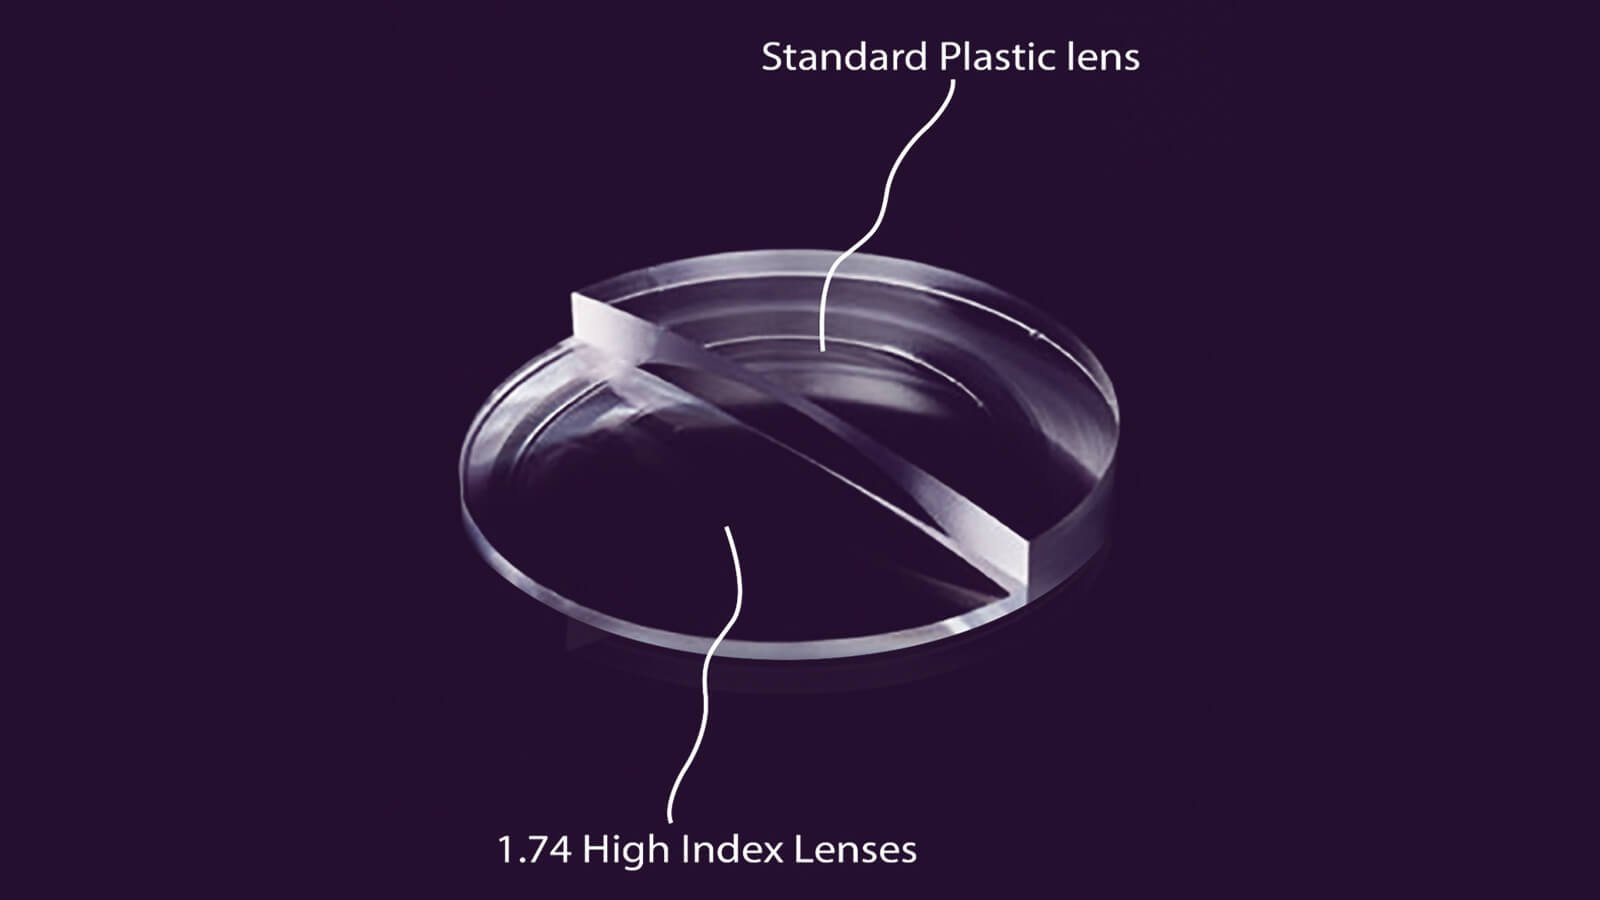 Difference between High-index lenses and Standard lenses